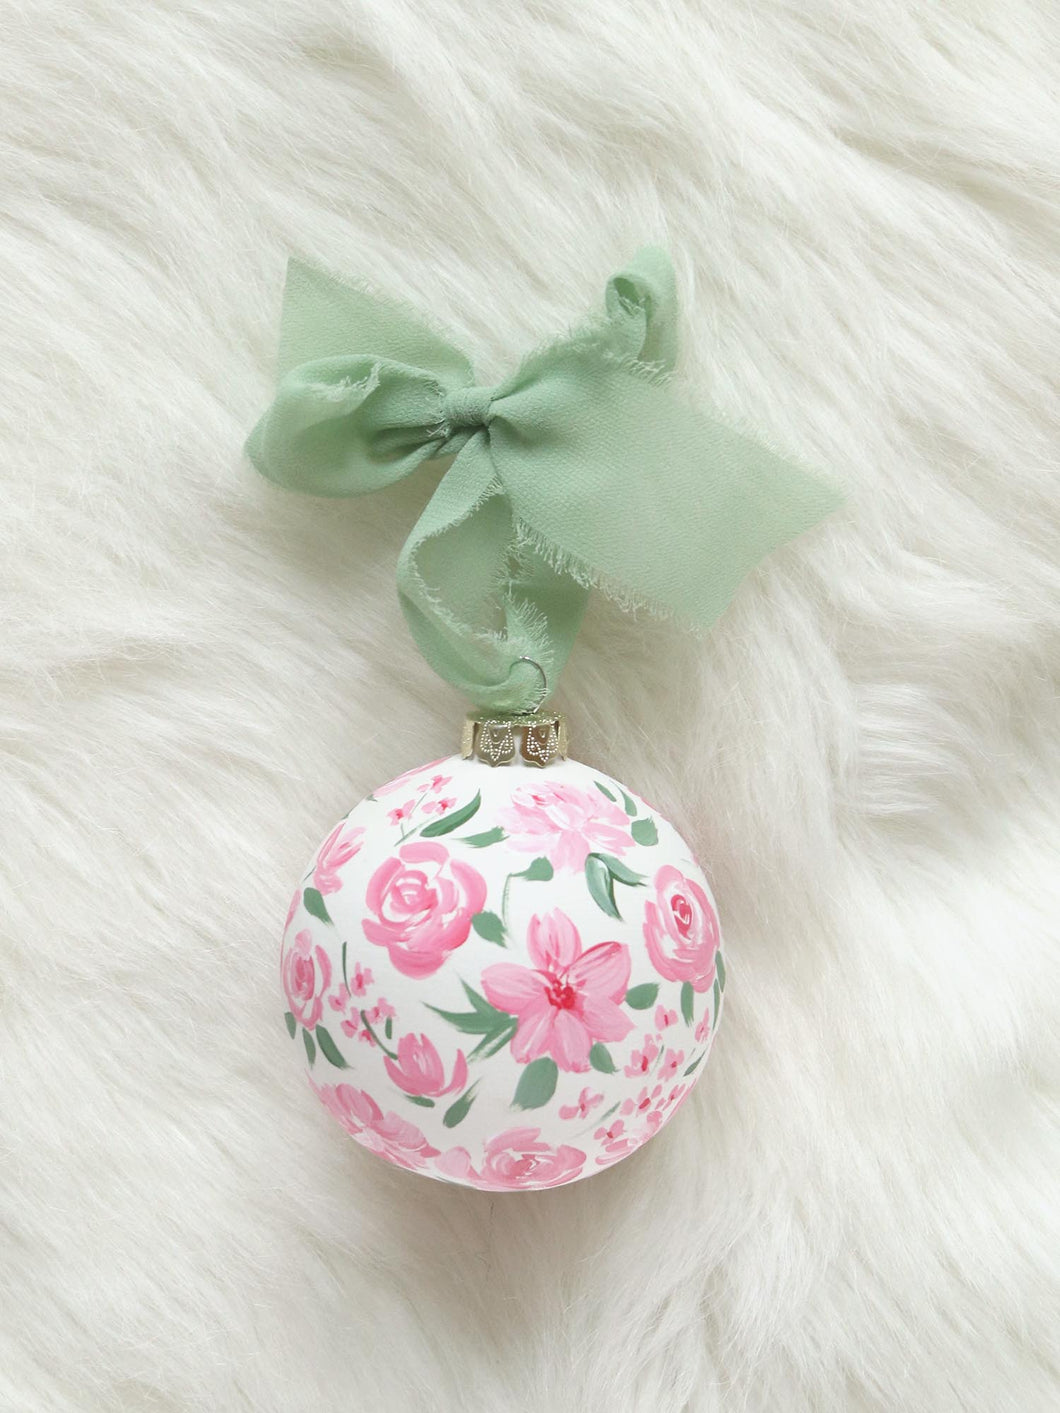 Pink floral hand-painted ornament